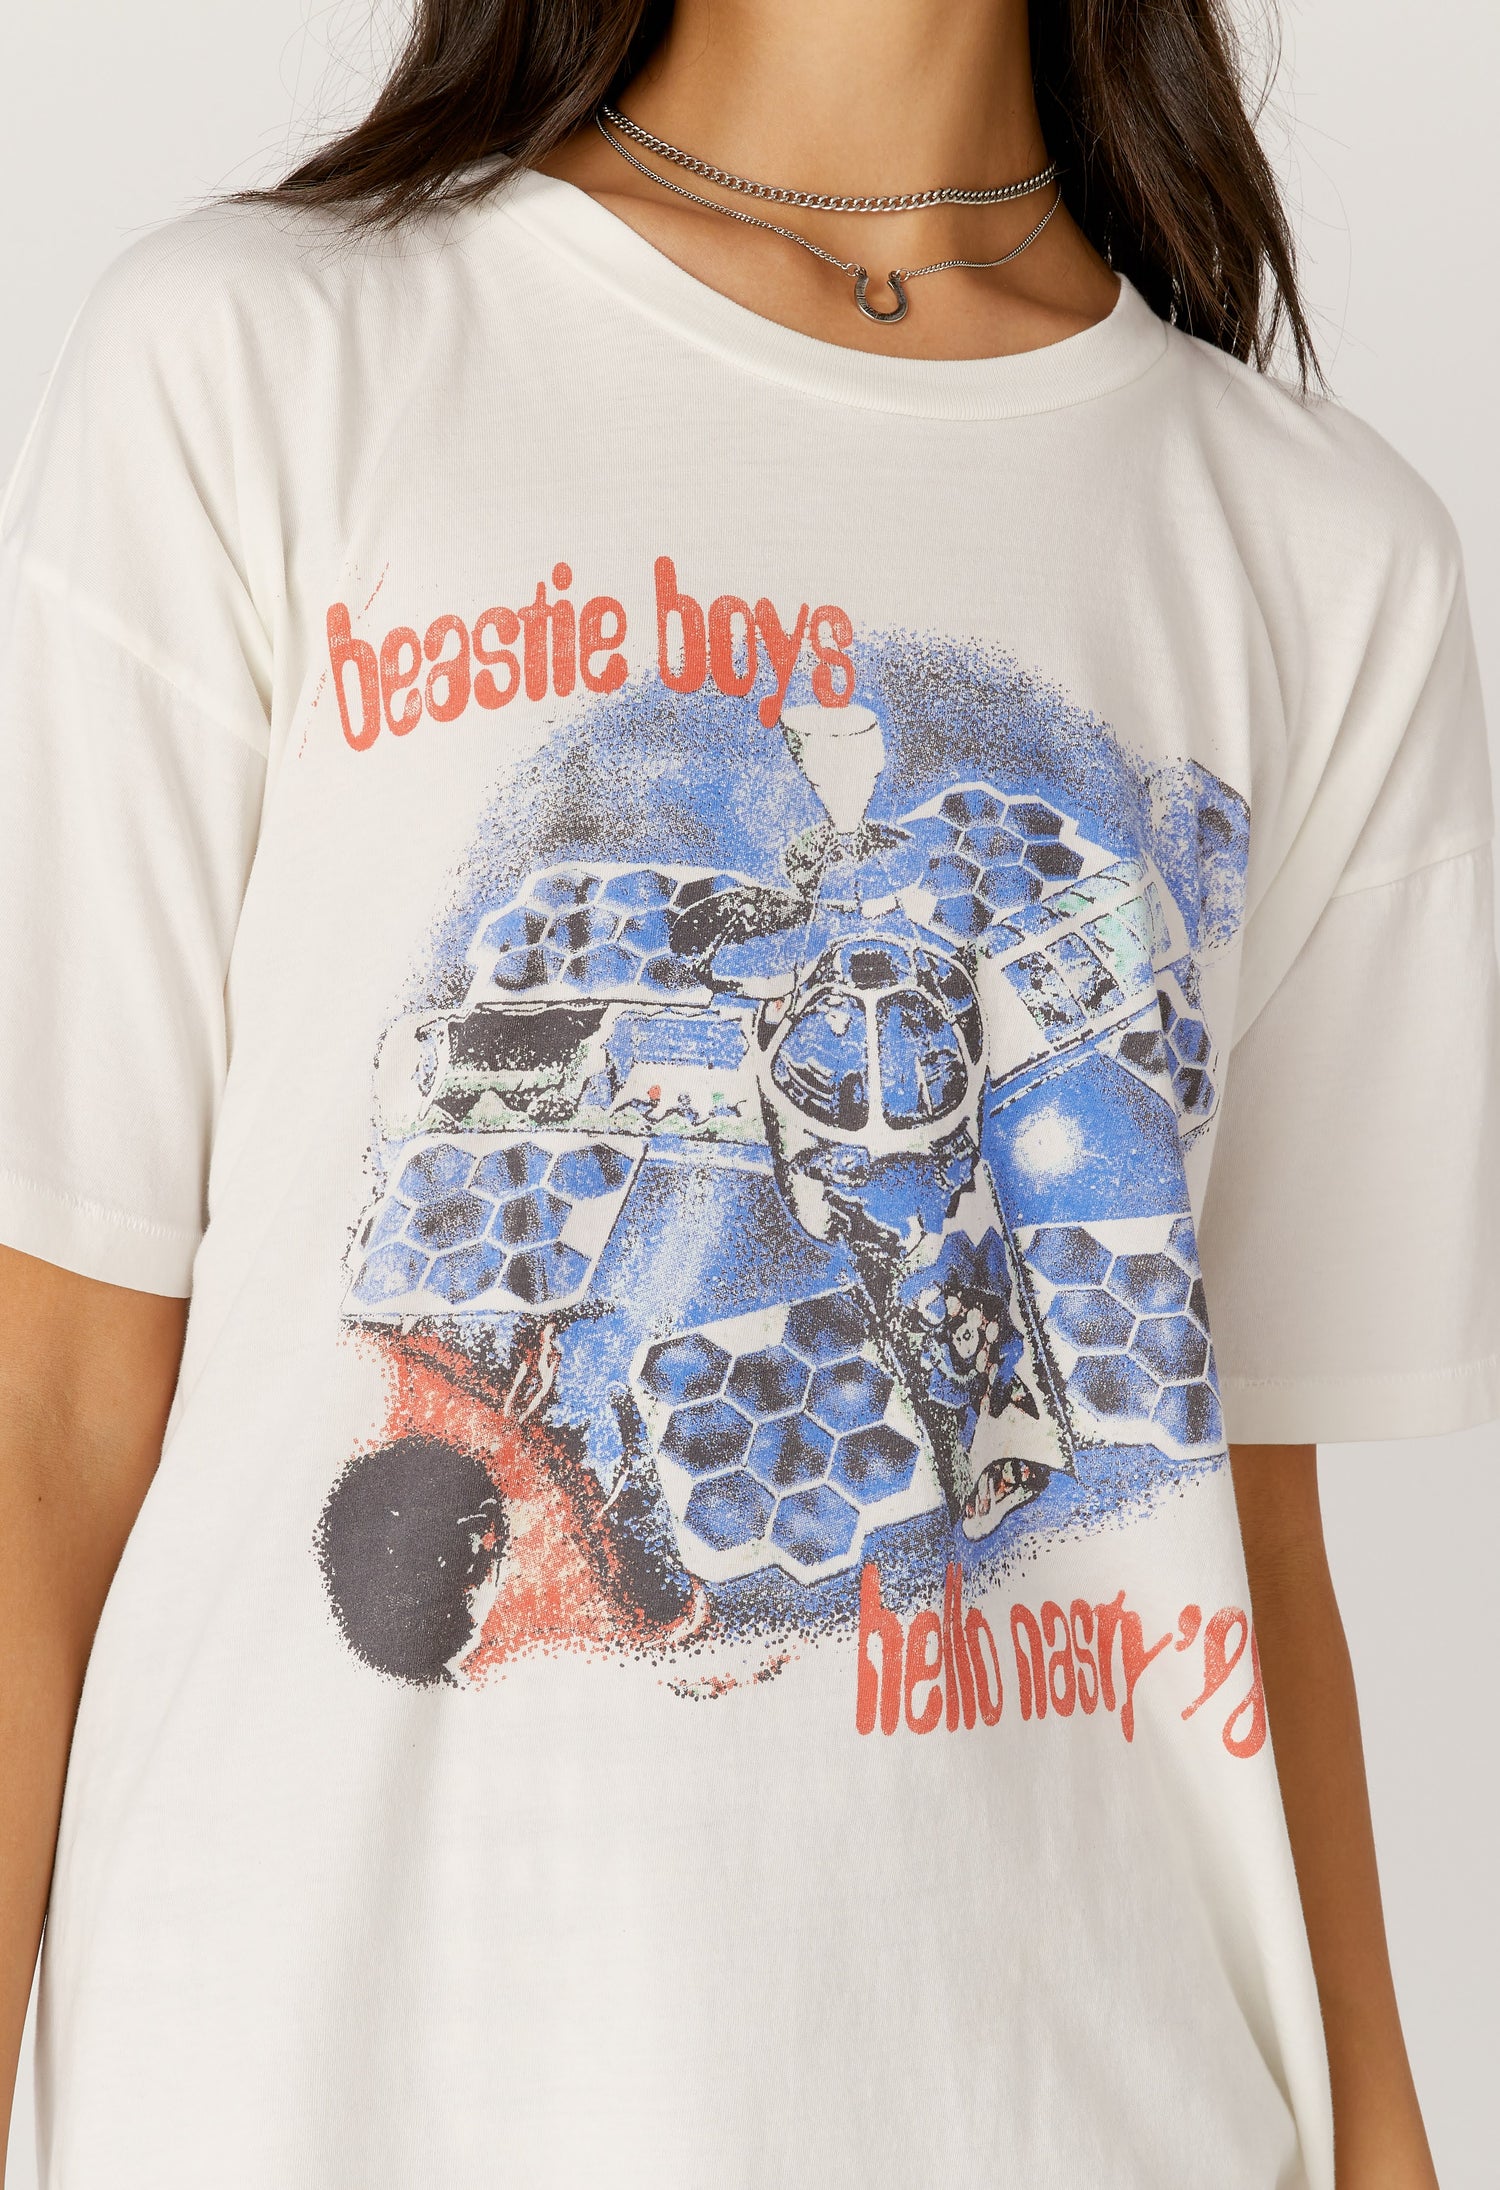 Model wearing a Beastie Boys 'Hello Nasty' tour graphic tee in vintage white